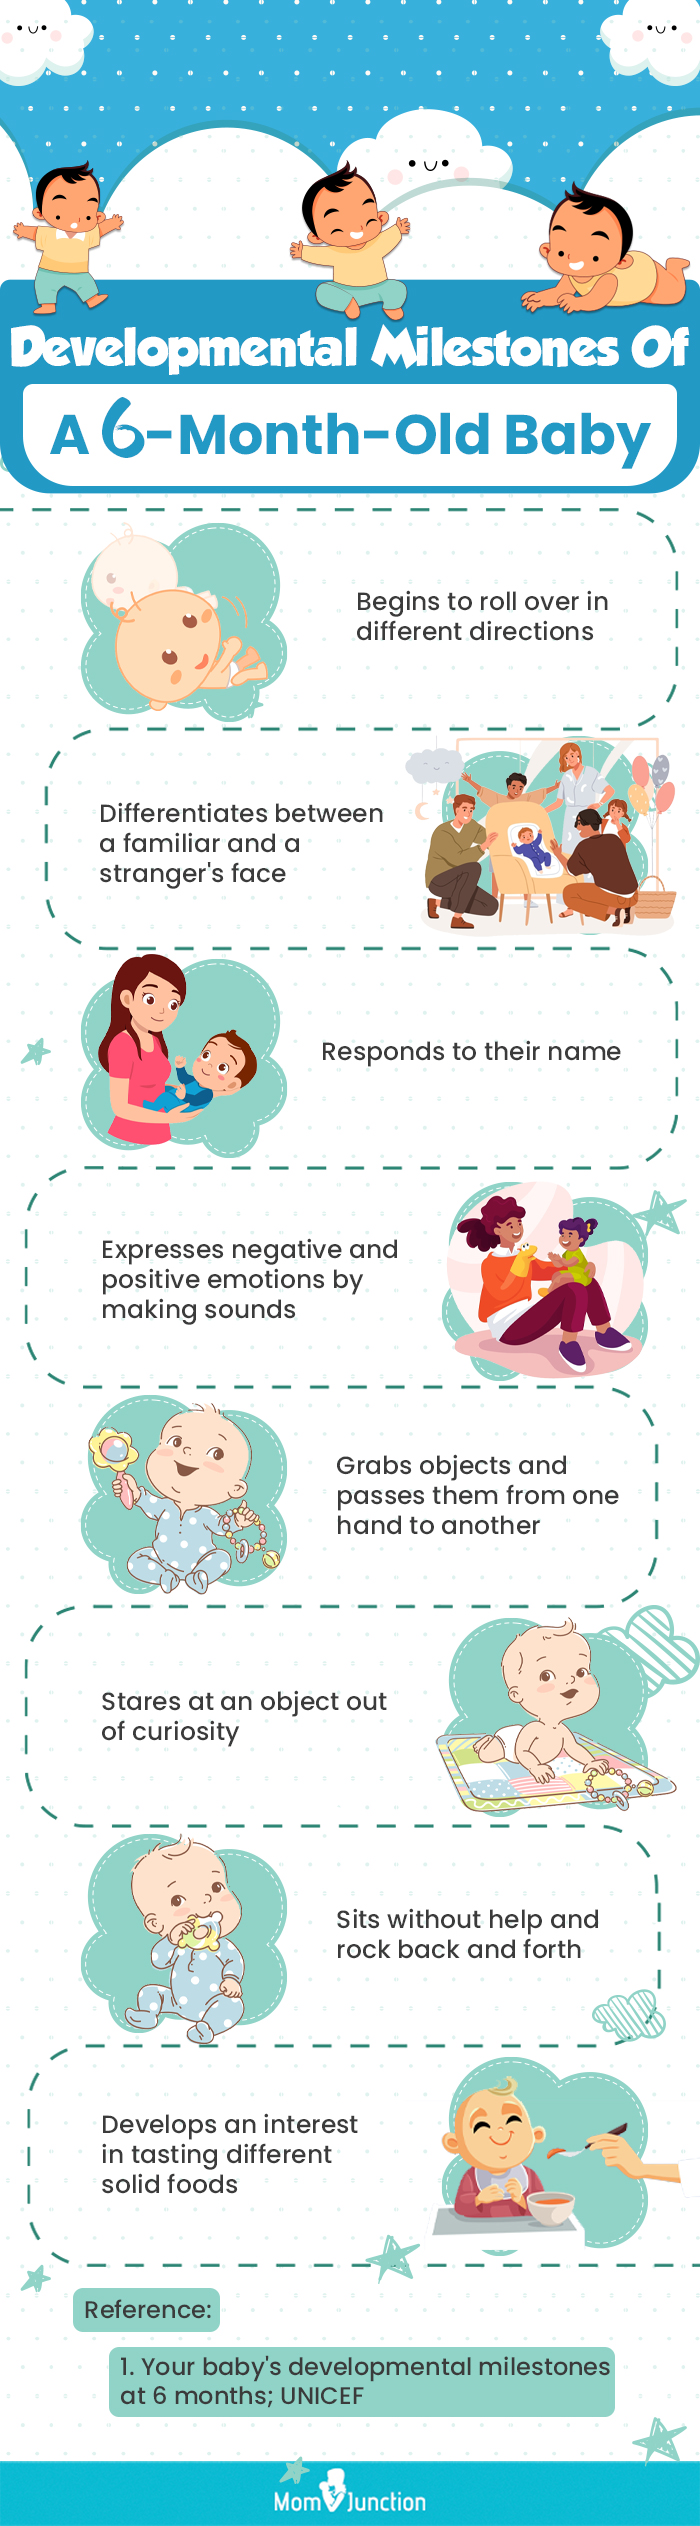 Developmental Milestones Of A Six Month Old Baby (infographic)